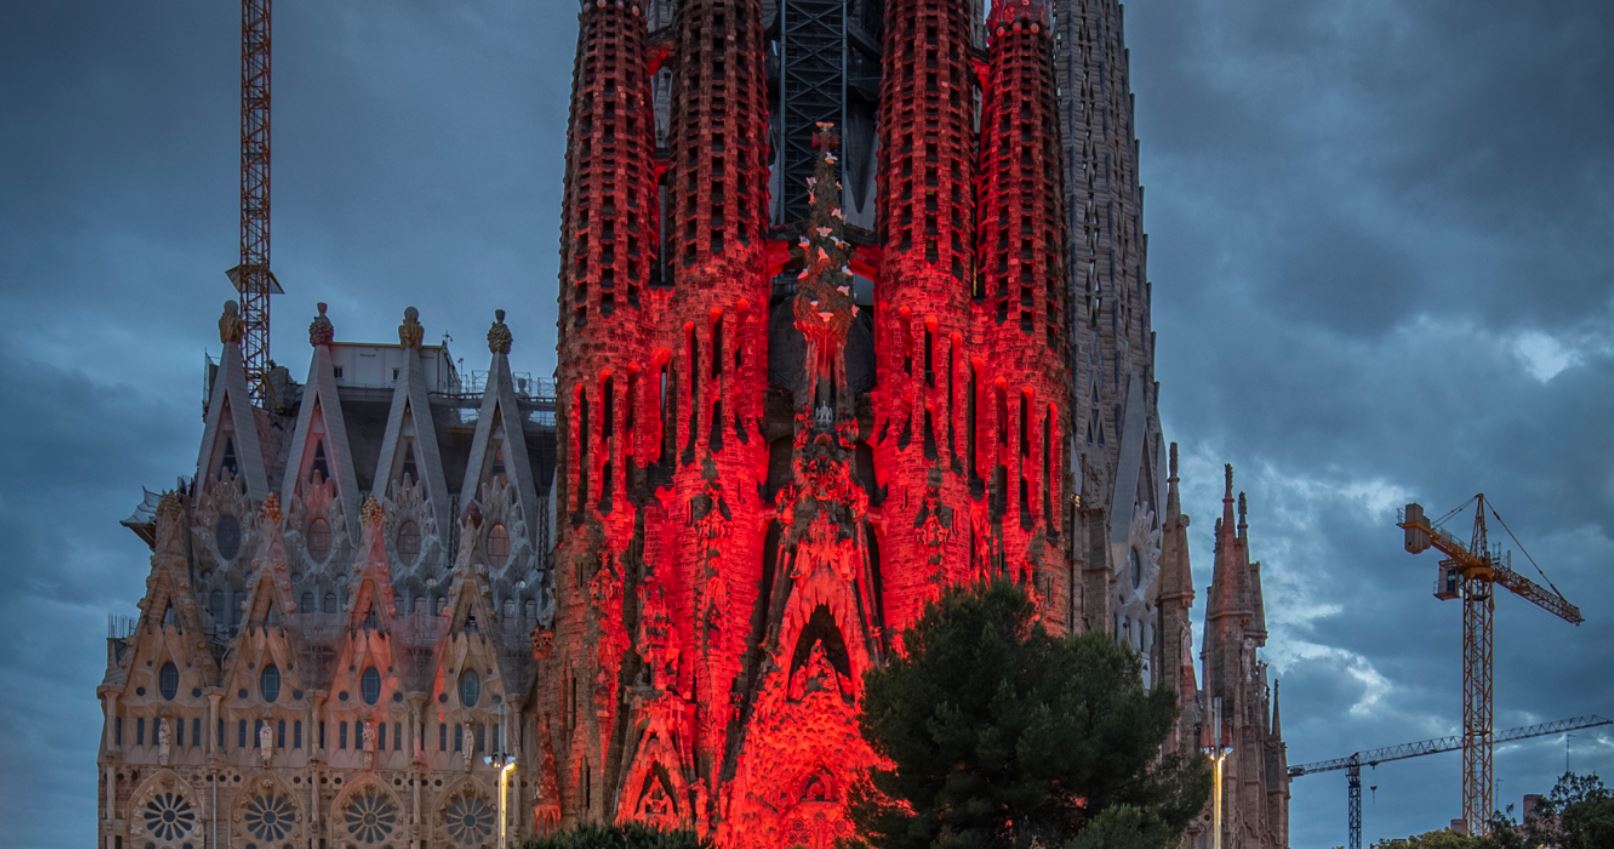 The front of the iconic Sagrada Familia lit up in red lights for charity (photo courtesy of Sagrada Familia)